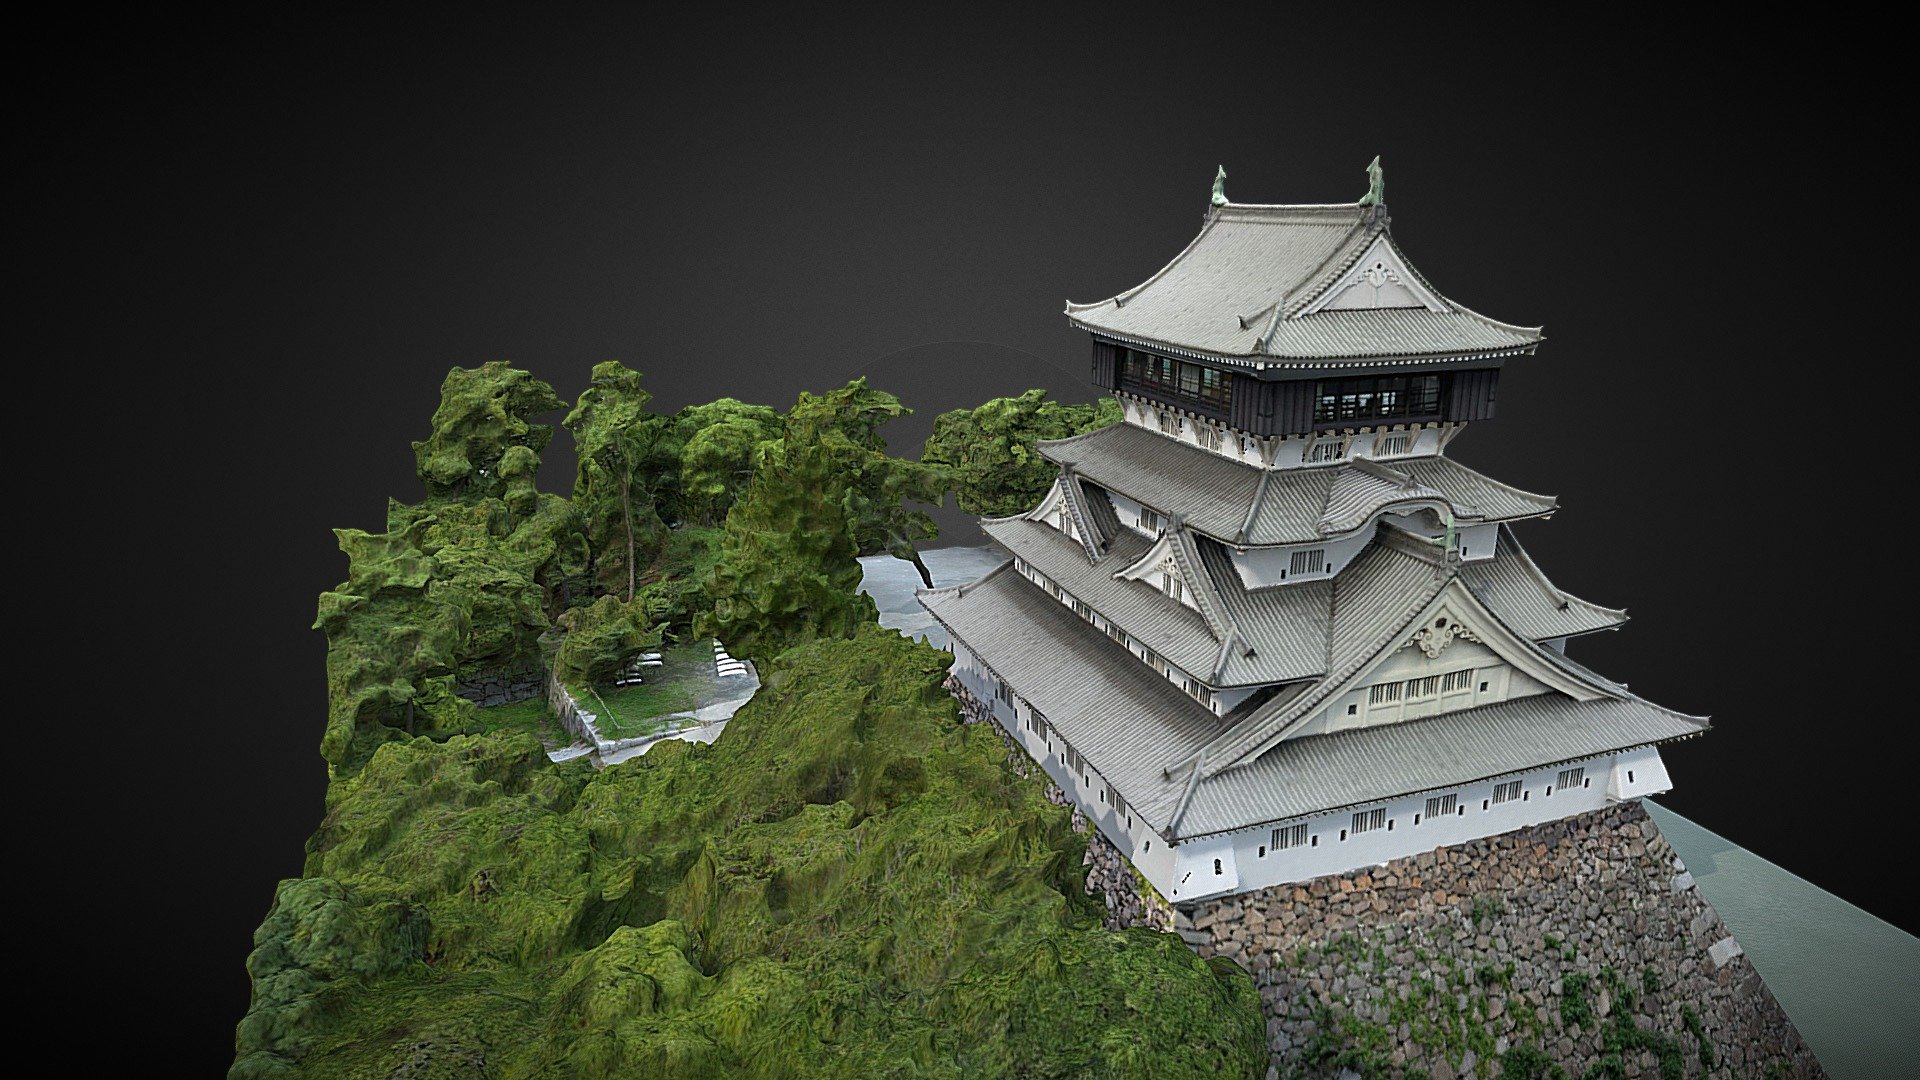 This 3D data of Kokura Castle was made using photogrammetry. This is Avatta's first attempt in using drones to make high quality 3D architectural scan. We have photographed over 1500 images from all directions and the data was processed using Agisoft Photoscan. 

Kokura Castle of Kitakyushu, Japan was built by Hosokawa Tadaoki in 1602. It was the property of the Ogasawara clan (from Harima) between 1632 and 1860. The castle was burnt down in 1866 in the war between the Kokura and Chōshū clans.

Mori Ogai was based at the castle at the turn of the 19th-20th century when it was a military base.
The keep was reconstructed in 1959, and the castle was fully restored in 1990. The Matsumoto Seicho museum and castle garden were opened in 1998. The old Japanese-style pre-Brunton lighthouse from Shirasu is in the castle grounds 3d model